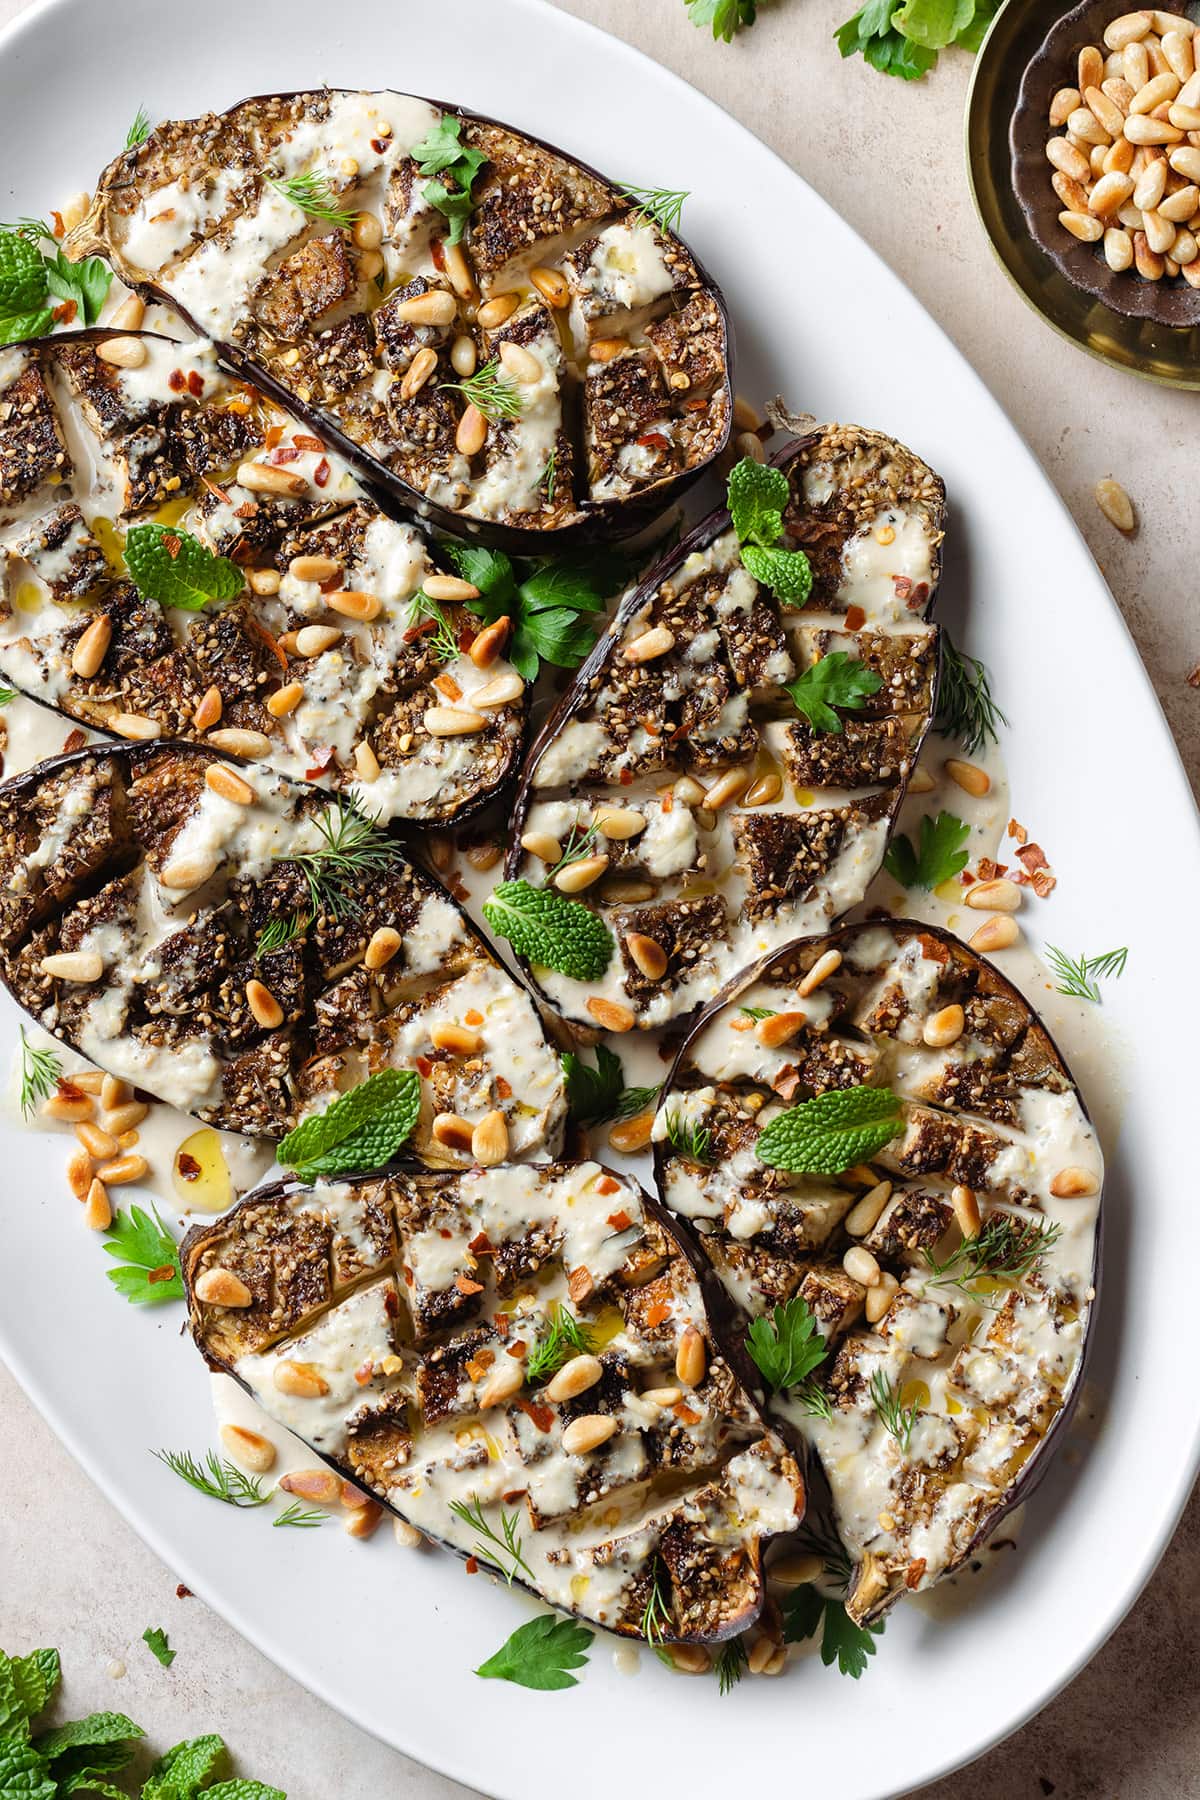 Halved roasted eggplant with spices, tahini sauce, herbs, and pine nuts on a large white serving plate.